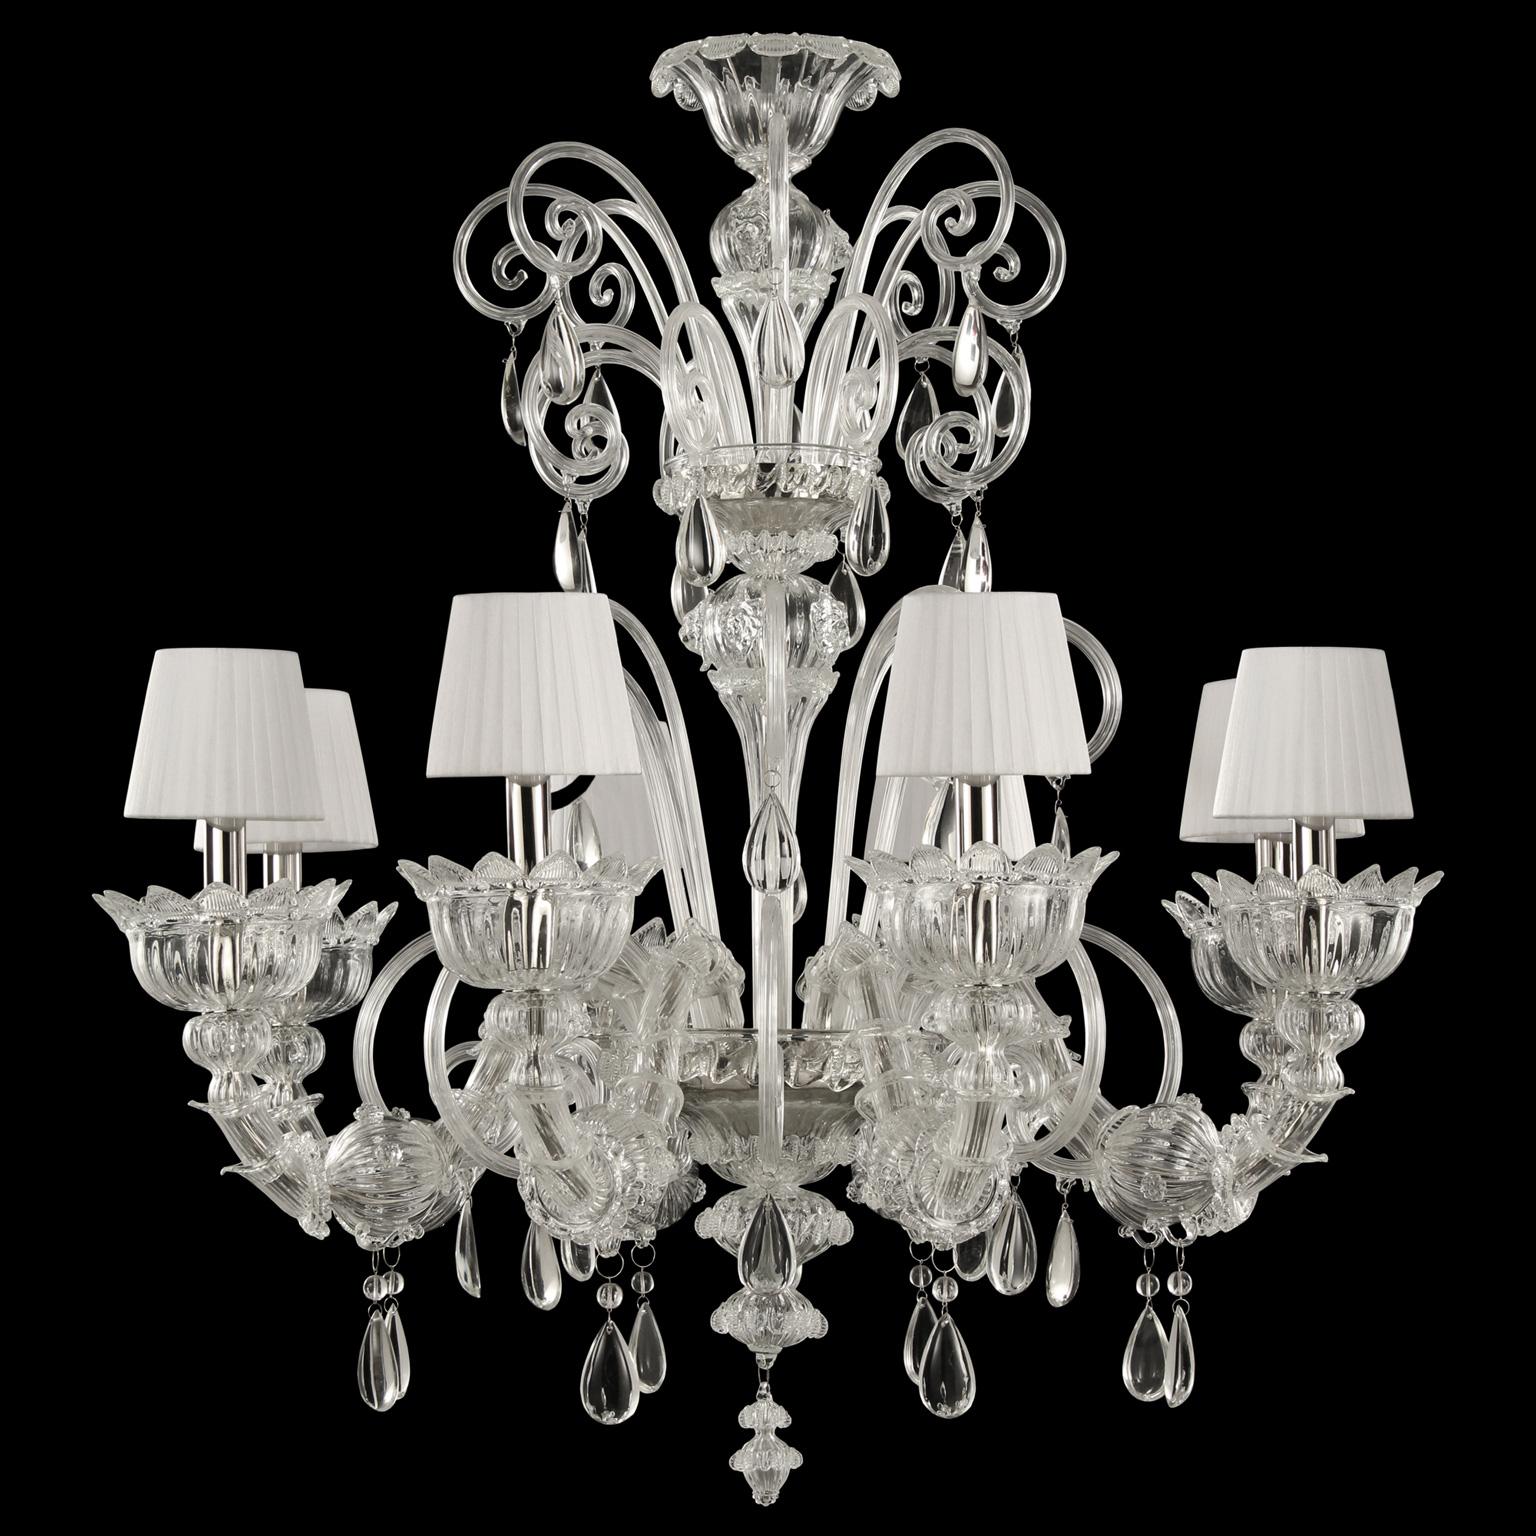 Montecristo chandelier 8 arms, artistic clear glass, white organza lampshades by Multiforme.
Montecristo collection is created with the typical elements of Venetian glass chandeliers. From the central column, decorated with “morrise” and roses,